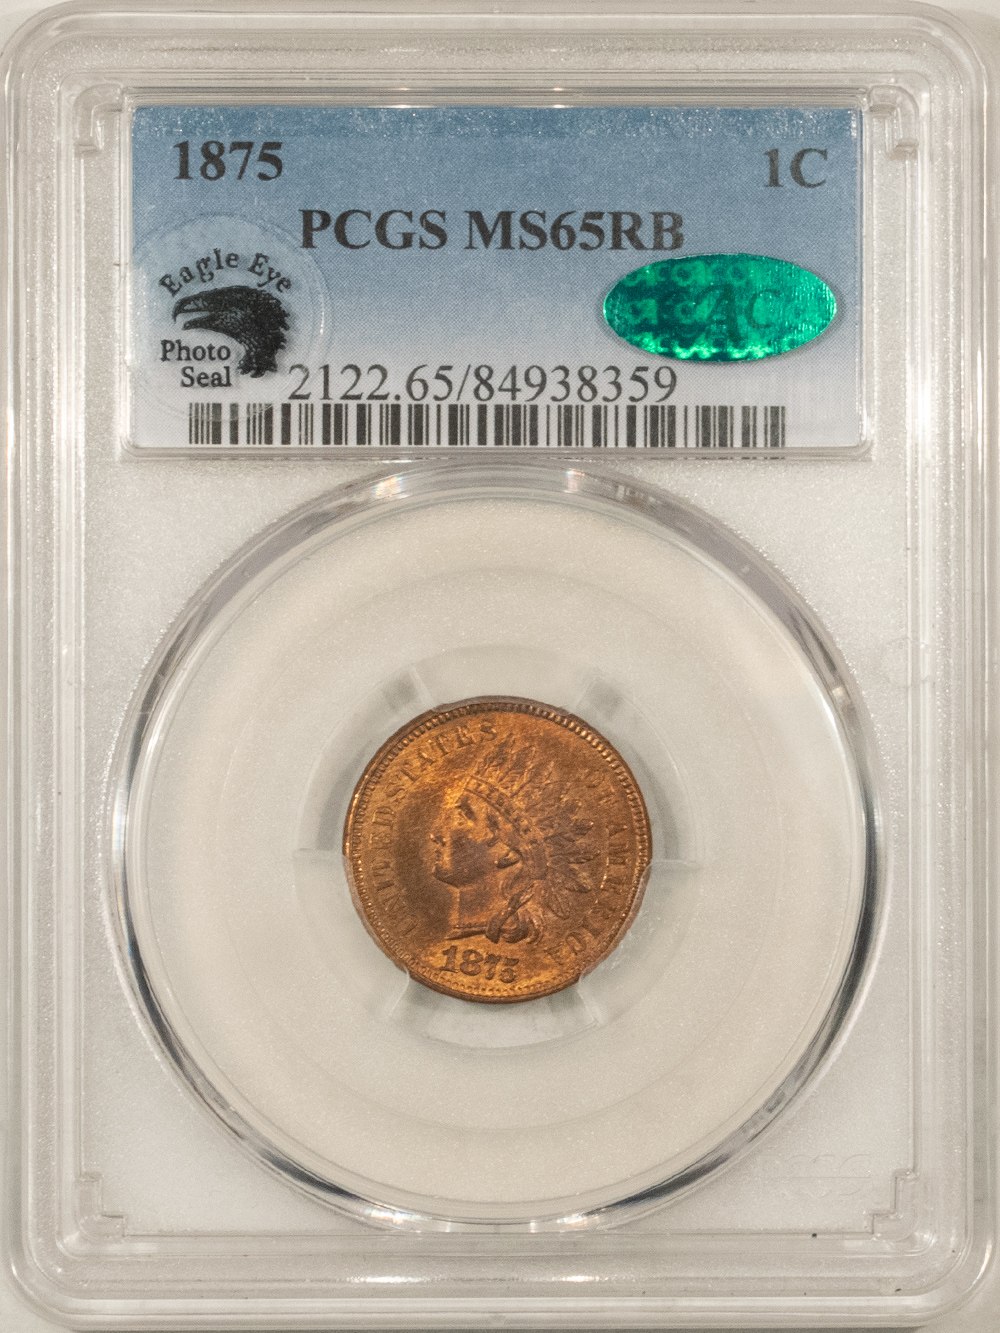 1875 INDIAN CENT - PCGS MS-65 RB, EAGLE EYE PHOTO SEAL & CAC APPROVED!